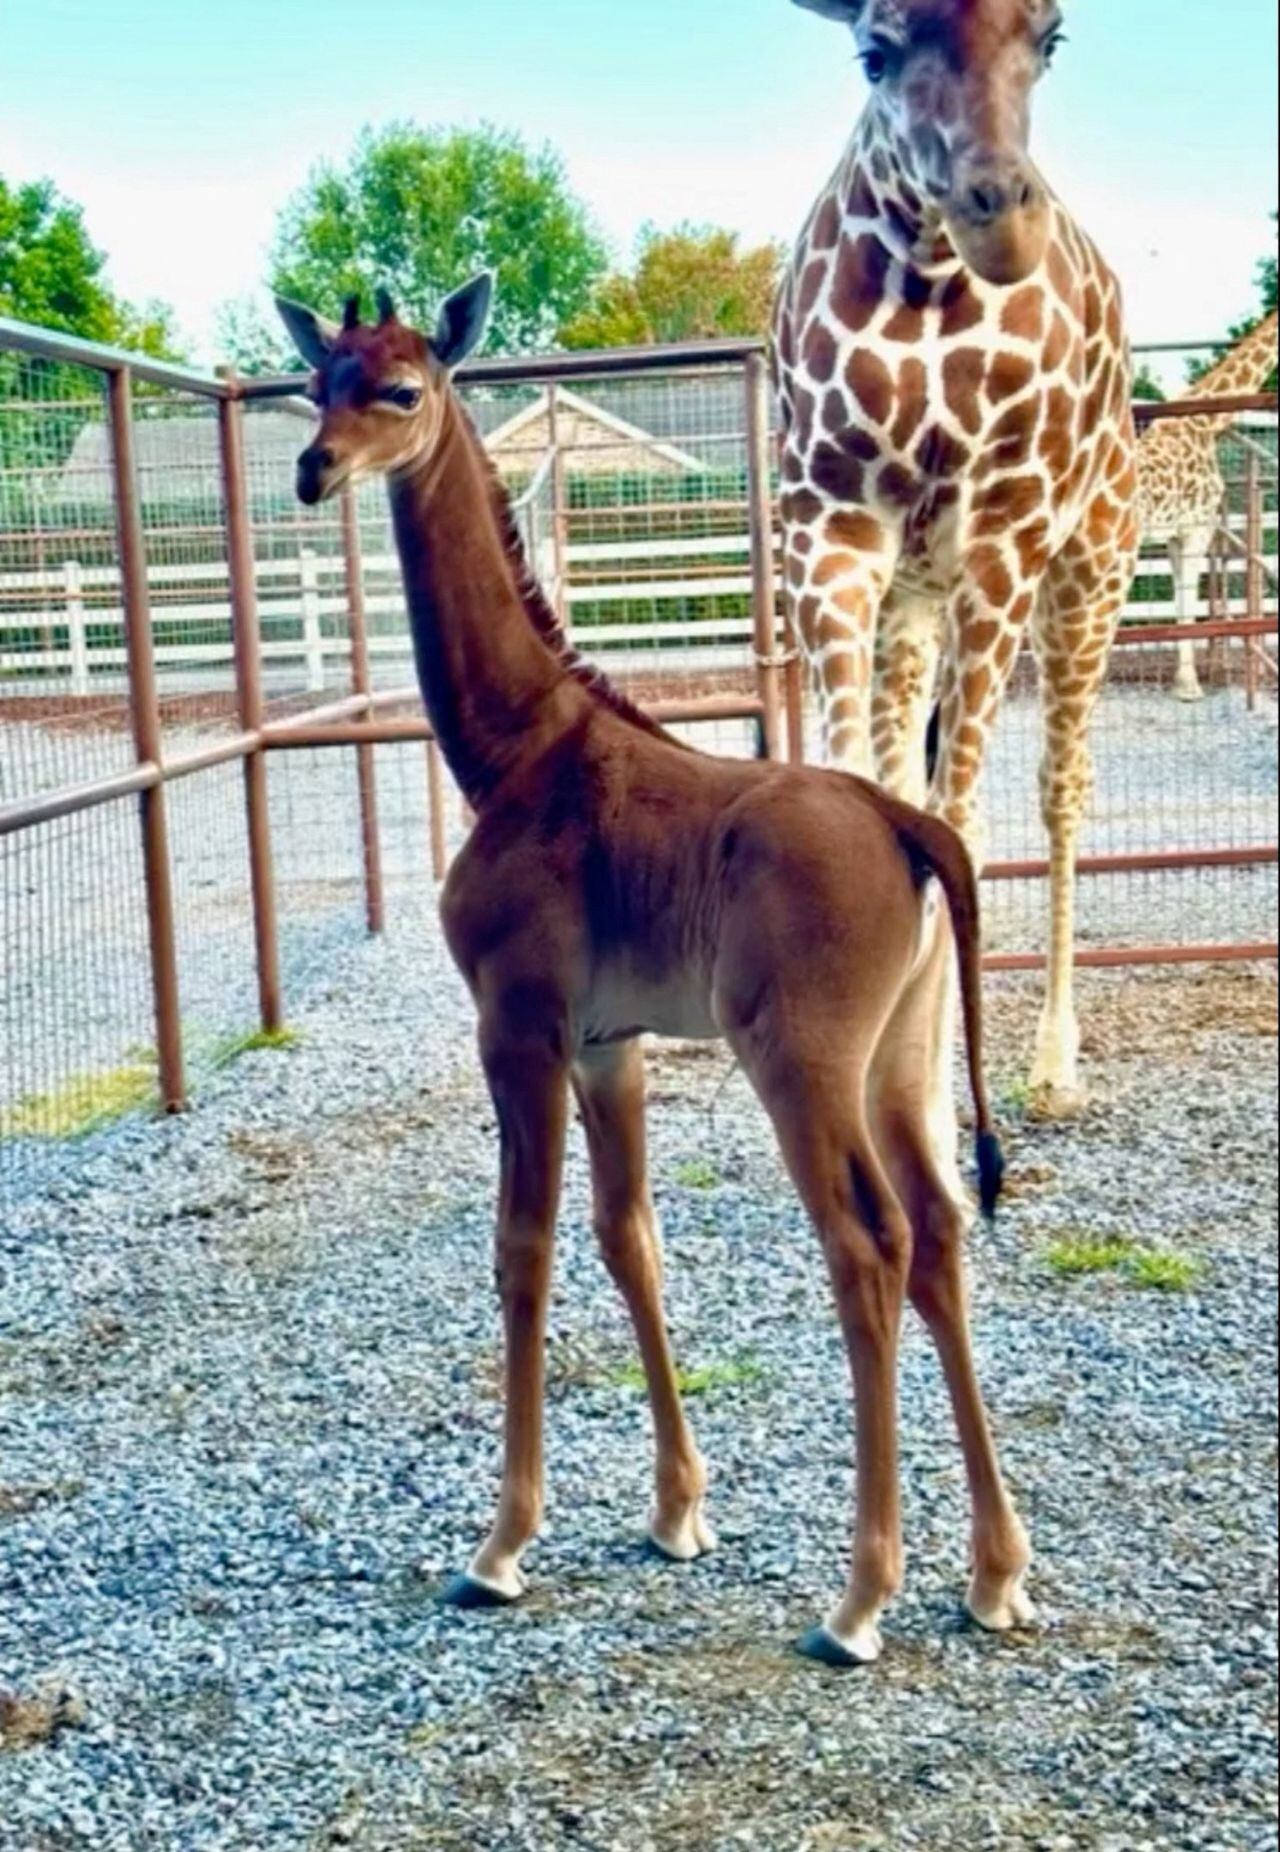 A rare spotless giraffe born at Bright's Zoo is seen in Johnson City, Tennessee, U.S., acquired by REUTERS on August 22, 2023, in a still image taken from a handout video. Bright's Zoo/TMX/Handout via REUTERS    THIS IMAGE HAS BEEN SUPPLIED BY A THIRD PARTY NO RESALES. NO ARCHIVES. MANDATORY CREDIT